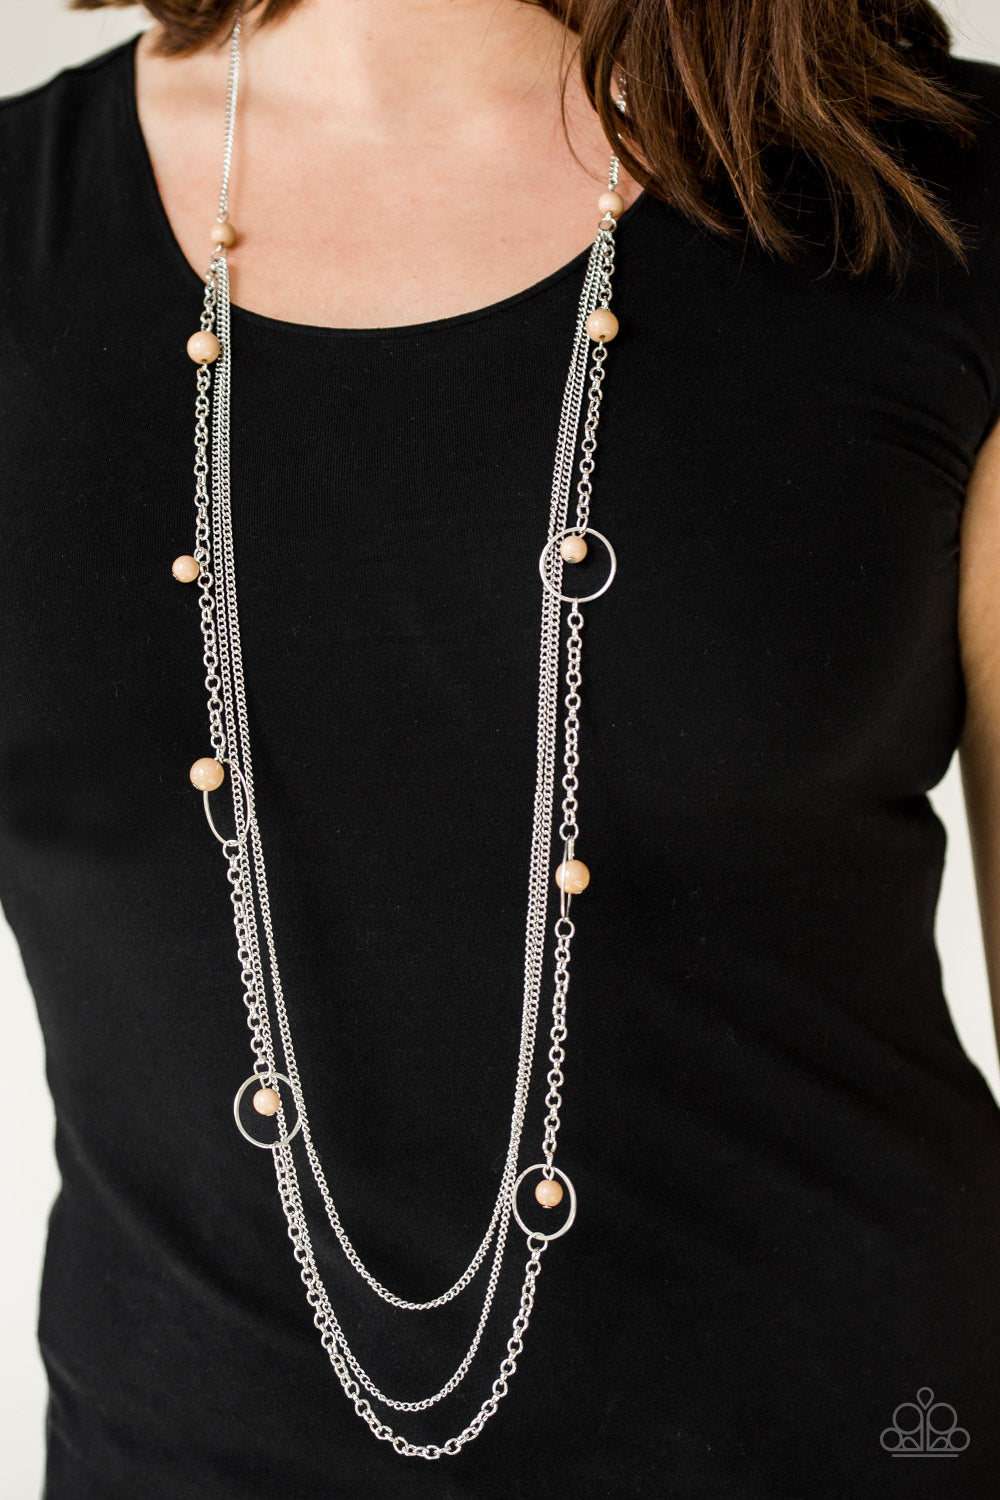 Paparazzi Collectively Carefree - Brown Beads - Silver Necklace & Earrings - $5 Jewelry With Ashley Swint